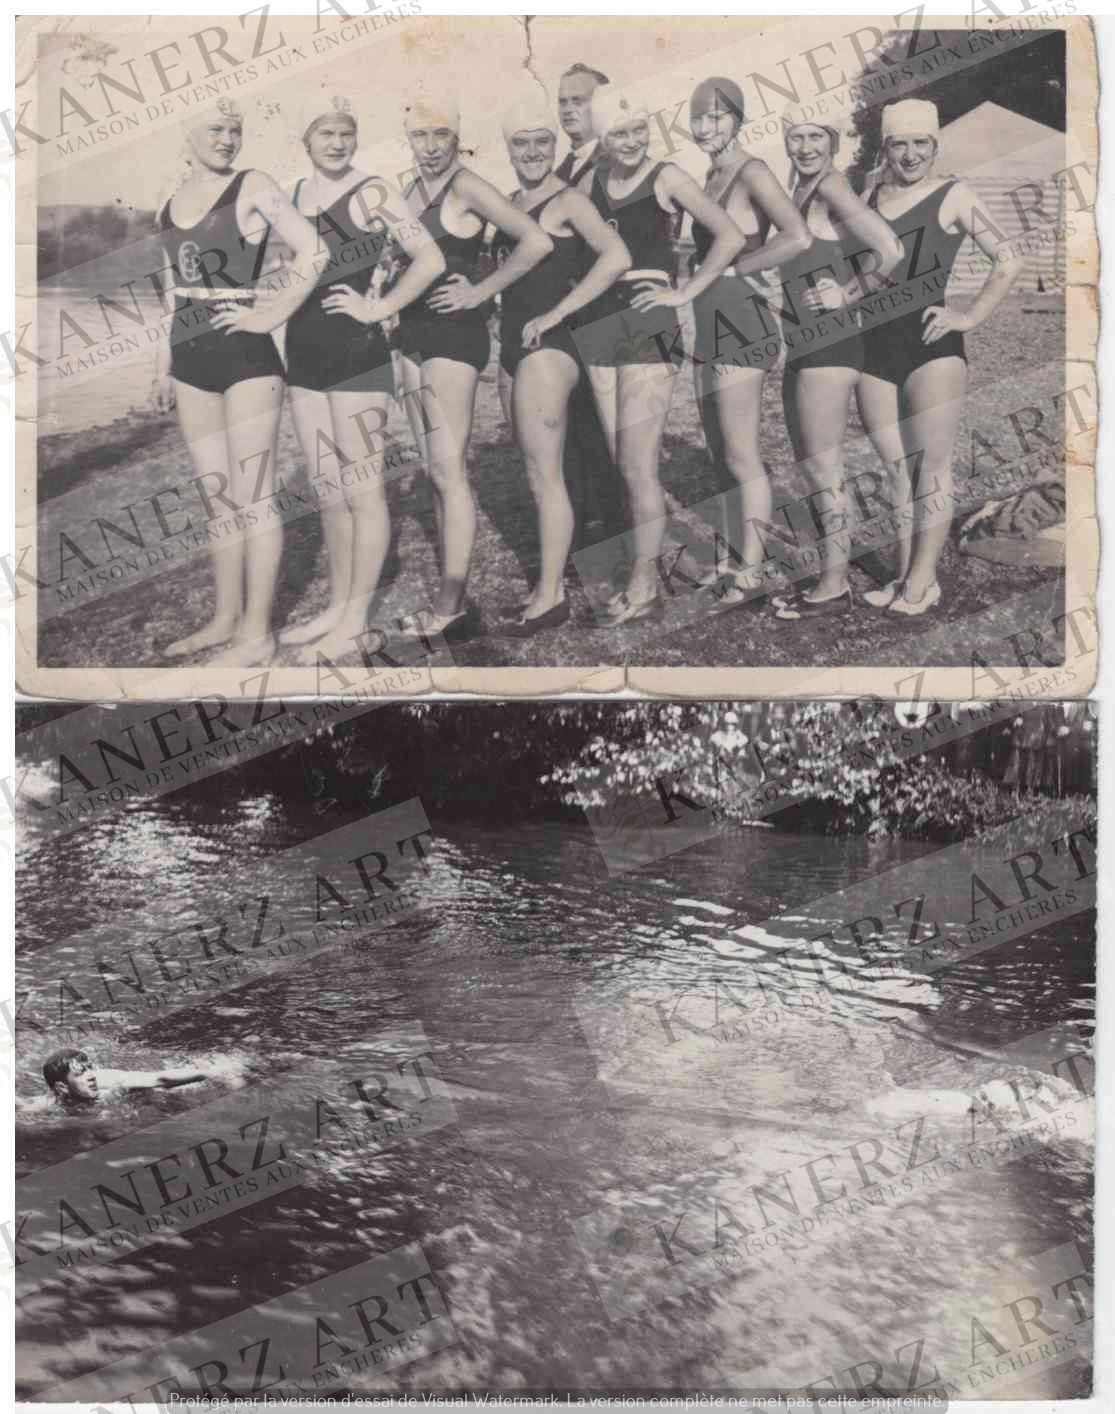 Null (SPORT/NATATION) 1. Photo card of a women's swimming team, 2. Photo card of&hellip;